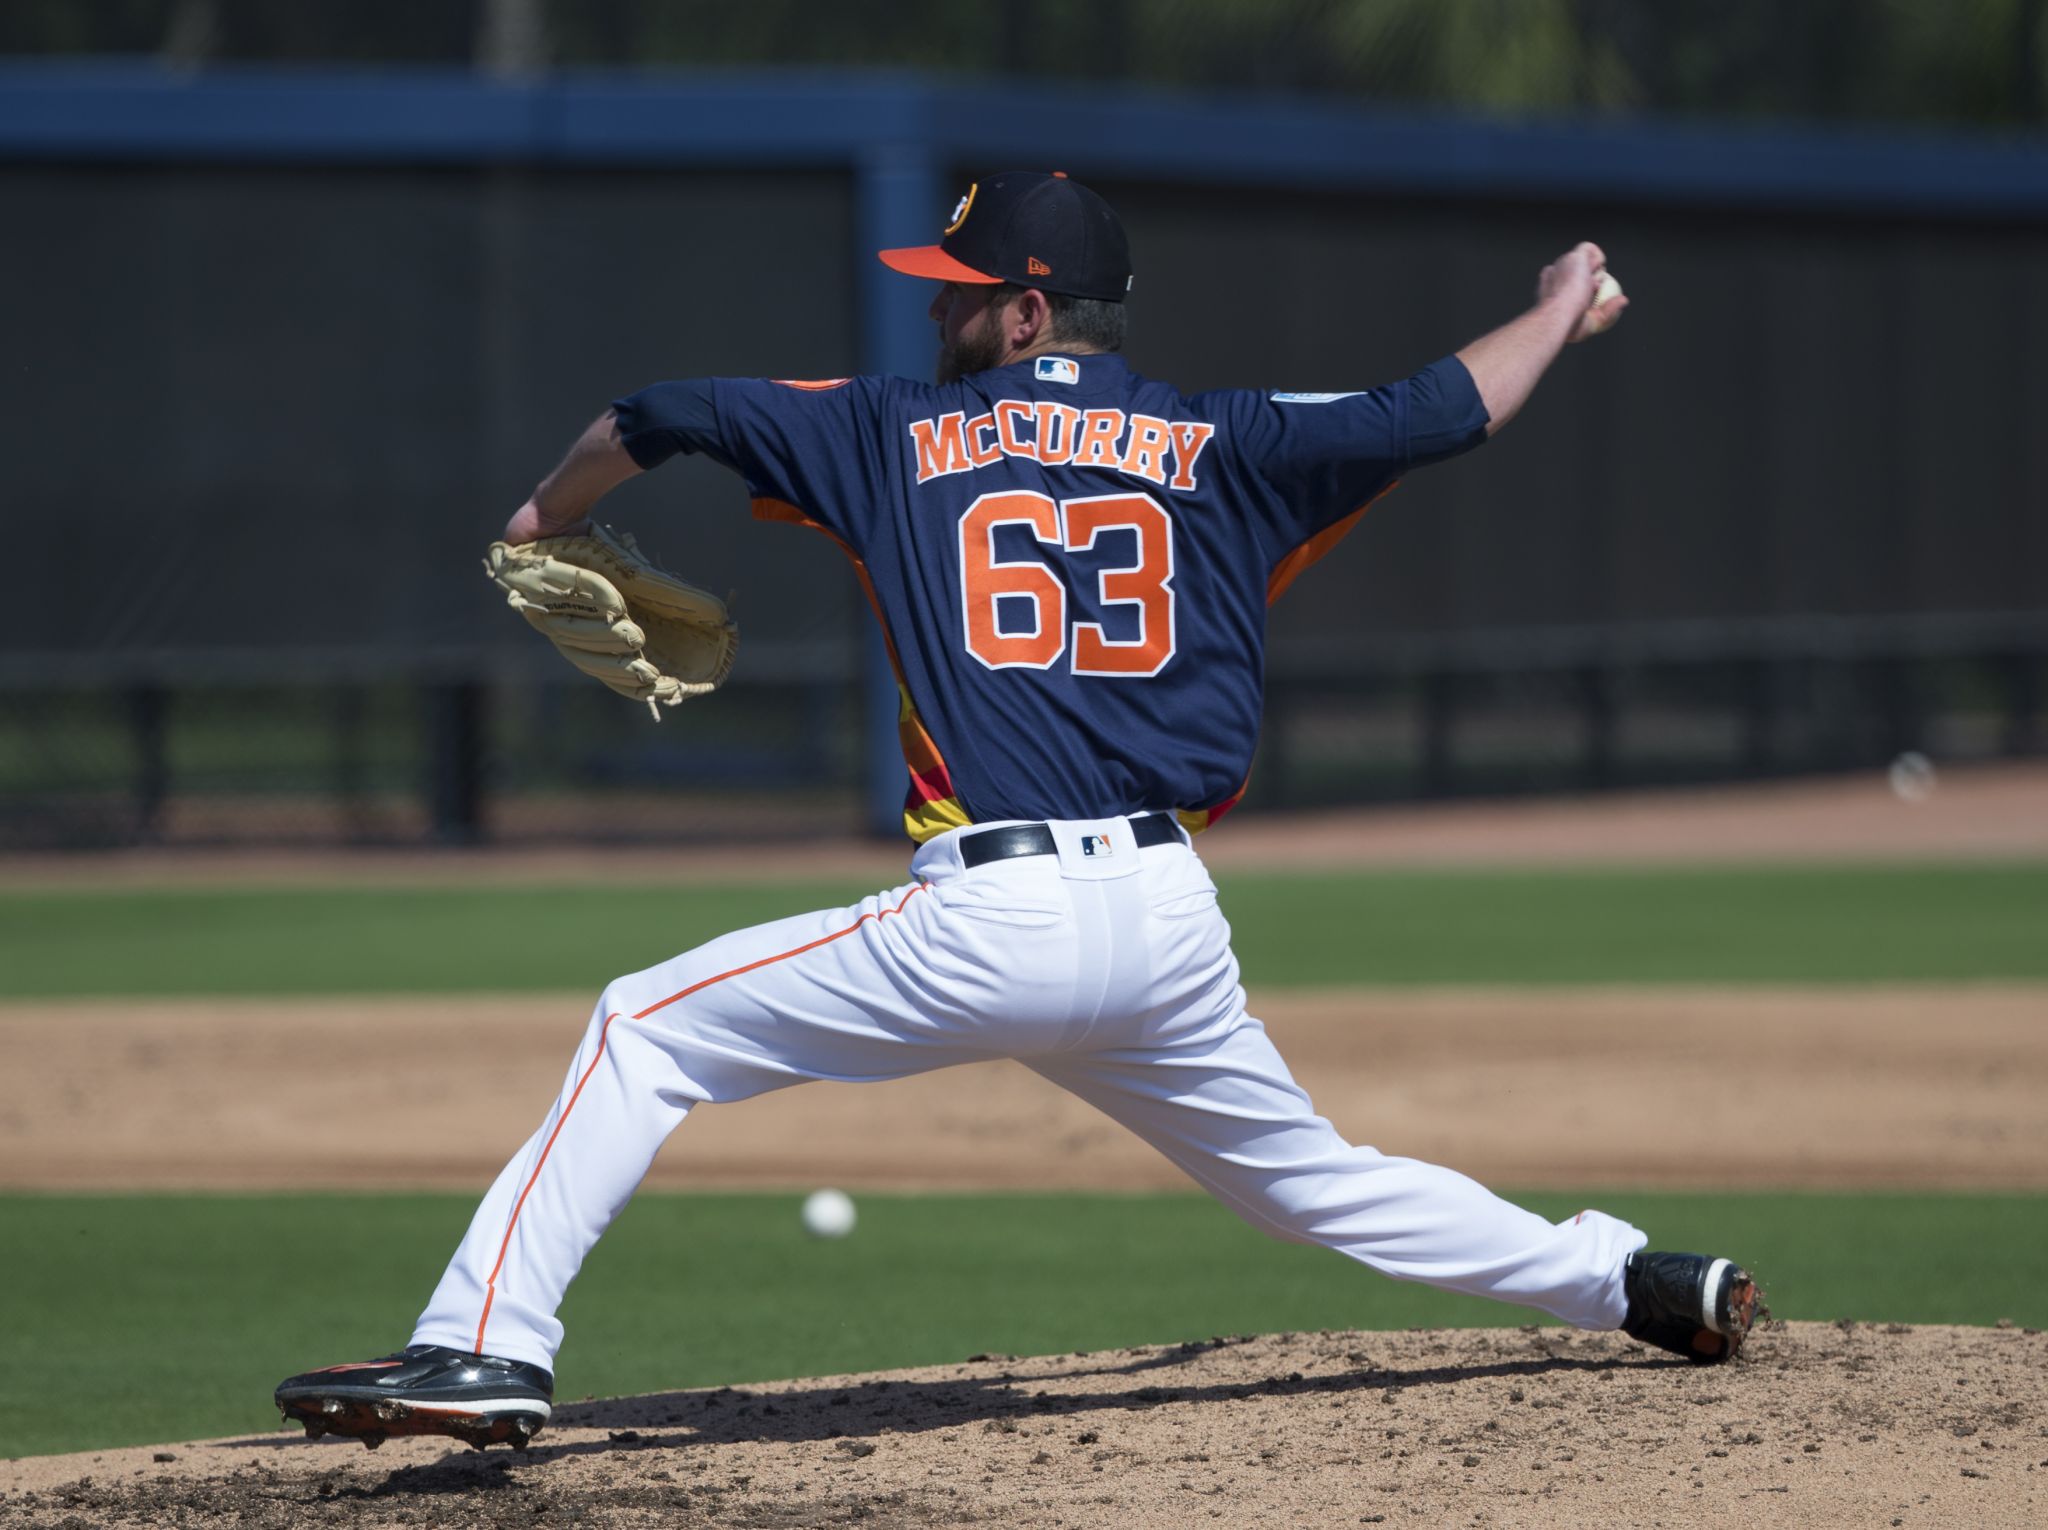 Daddy's back': Forrest Whitley gets new jersey at Astros spring training